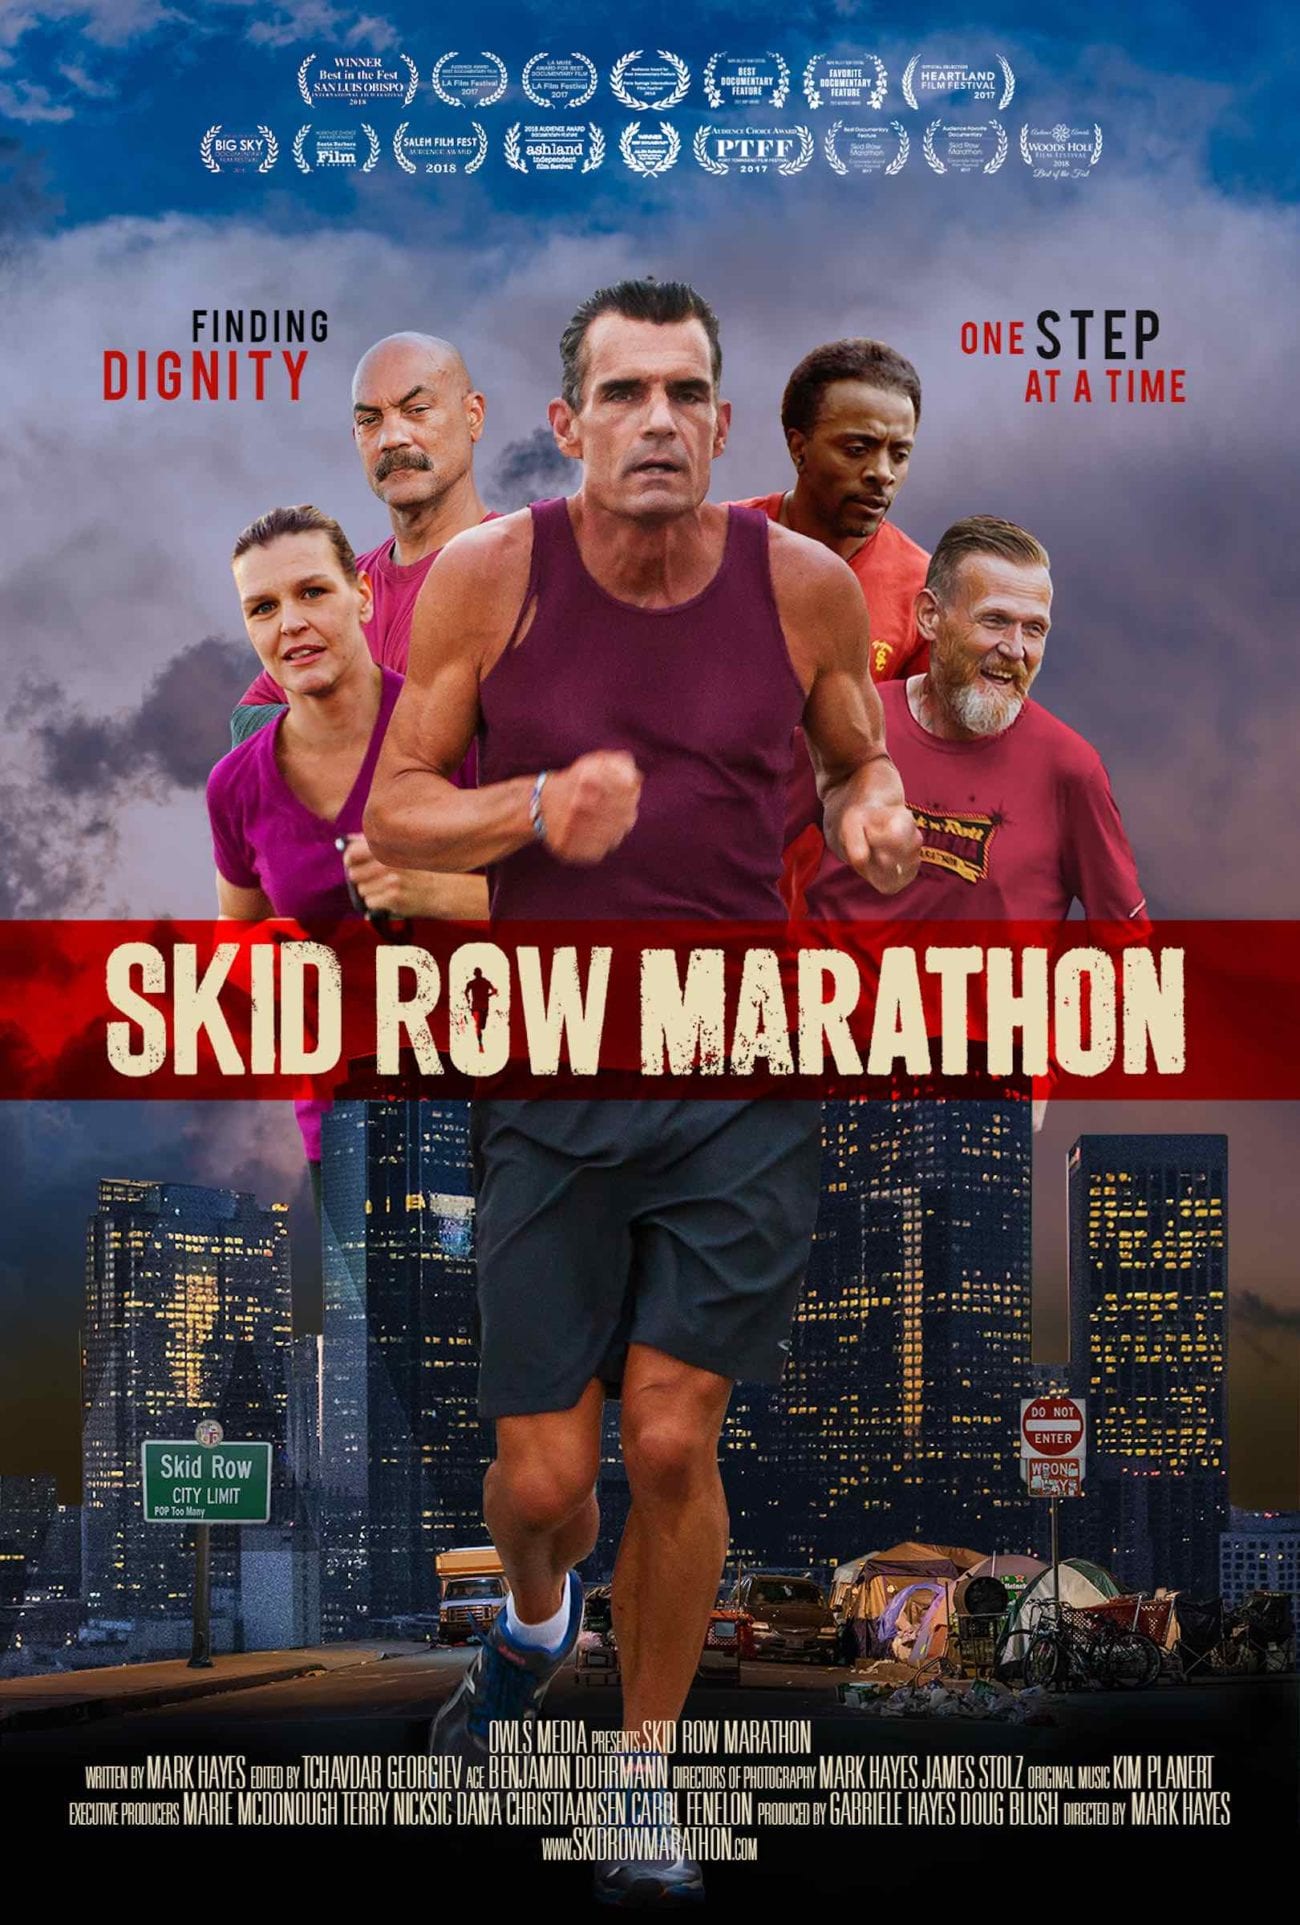 We sat down with producer of 'Skid Row Marathon' Gabi Hayes to chat running, movies, and the Melbourne Documentary Film Festival.